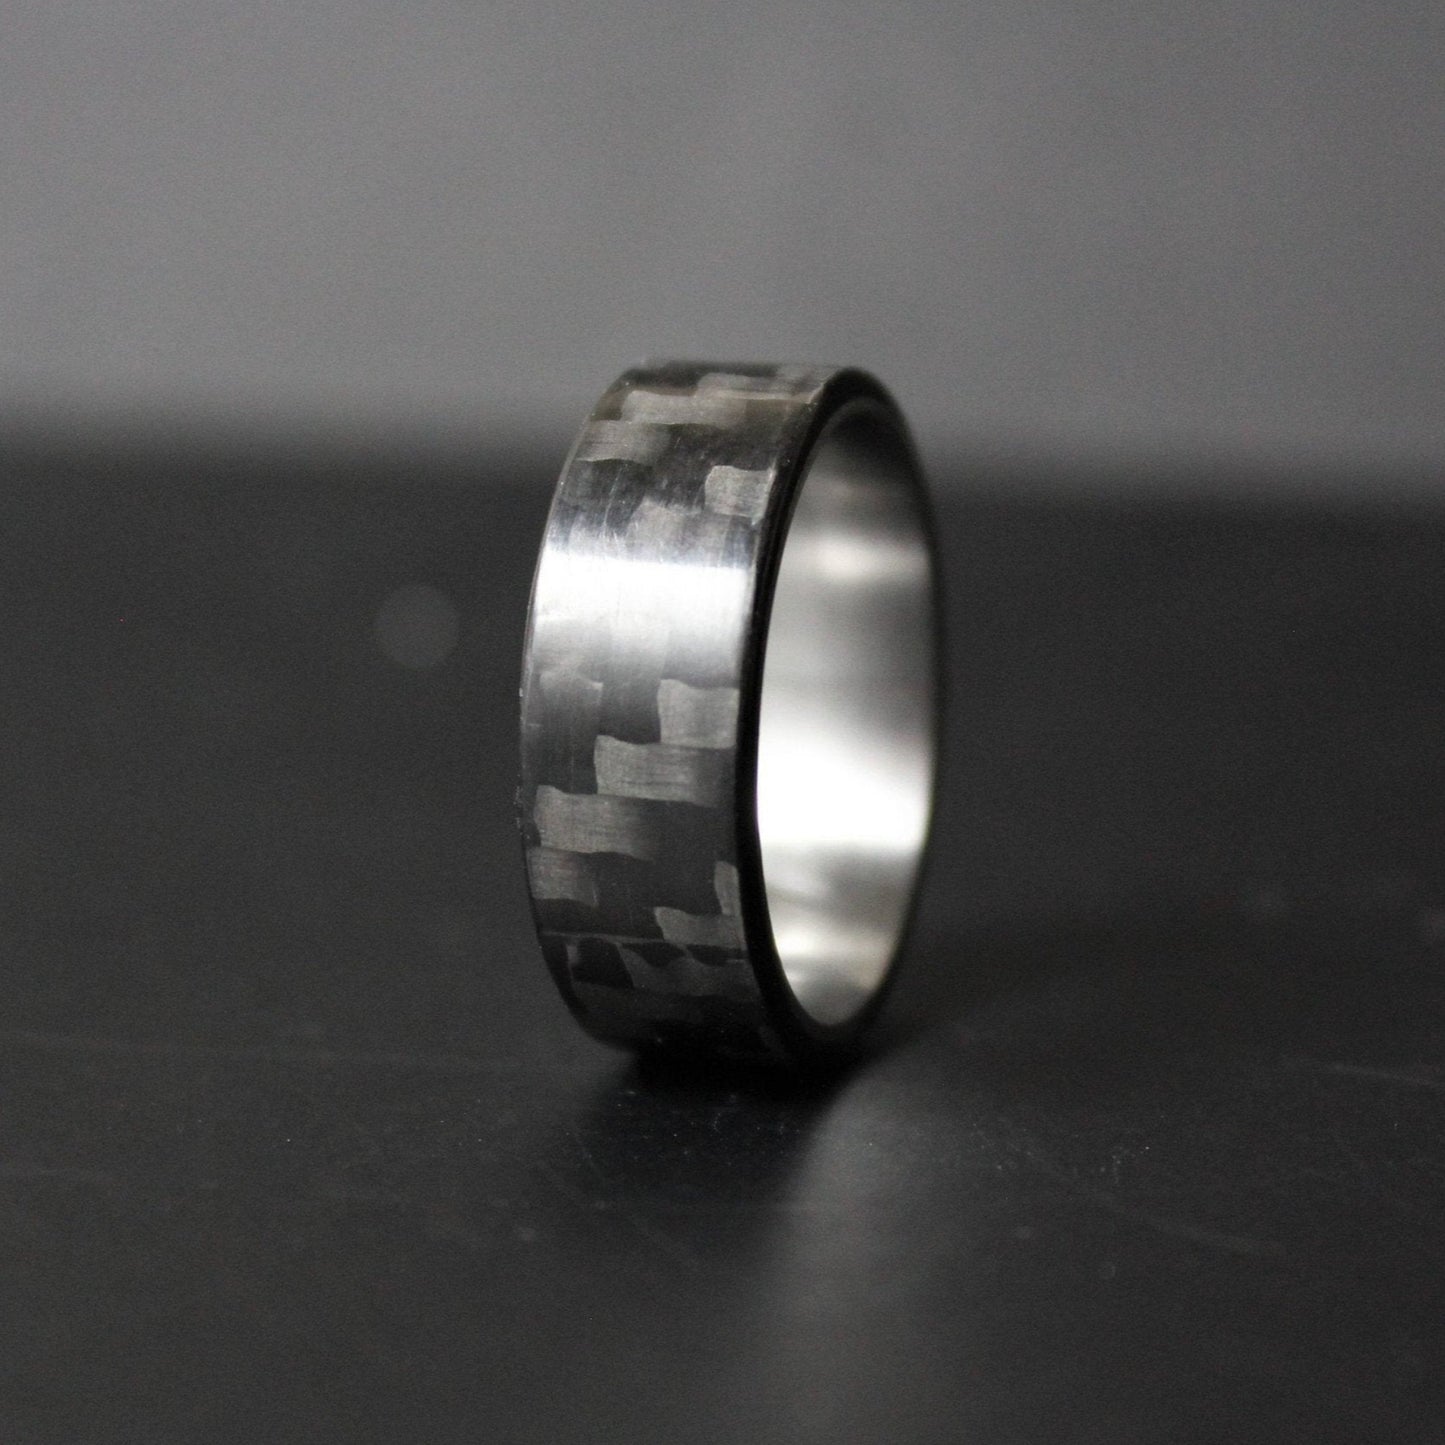 Carbon Fiber and Stainless Steel Ring